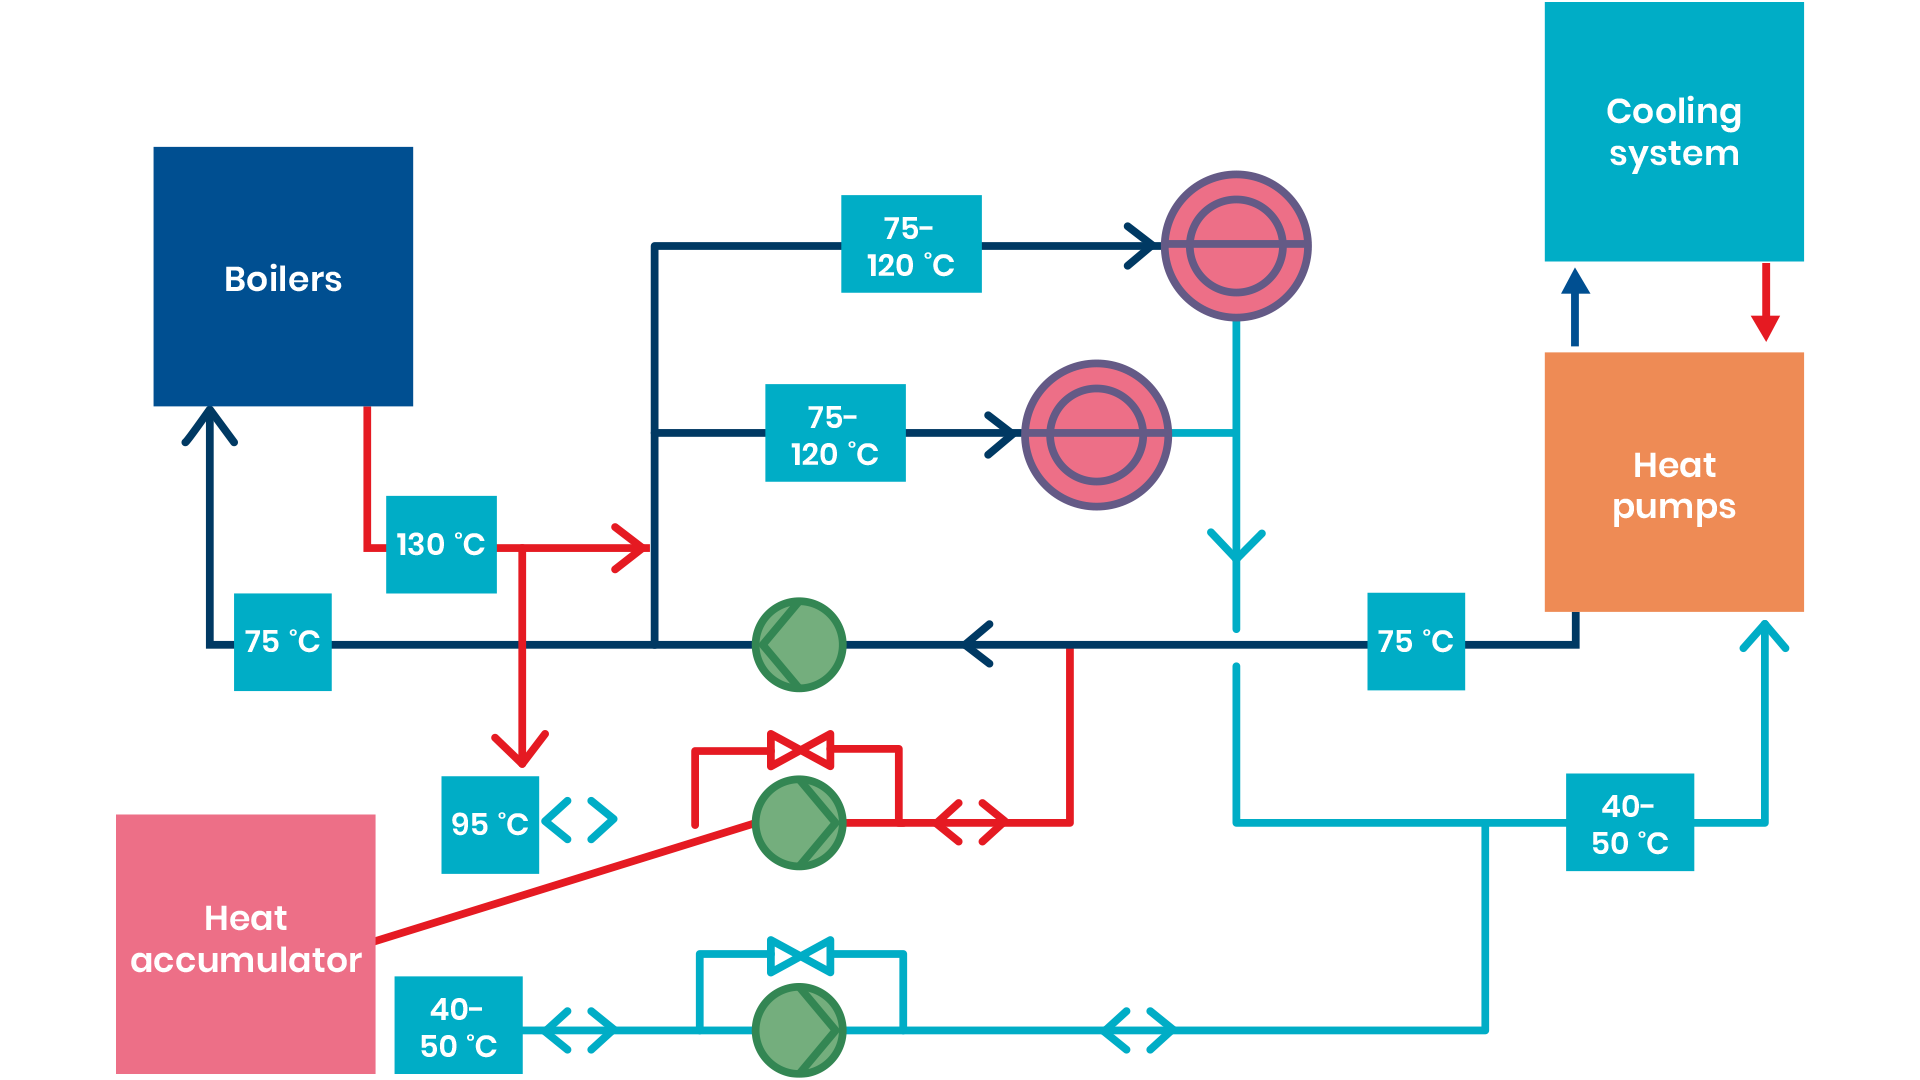 Example Of A Complex Energy Production System In Industry